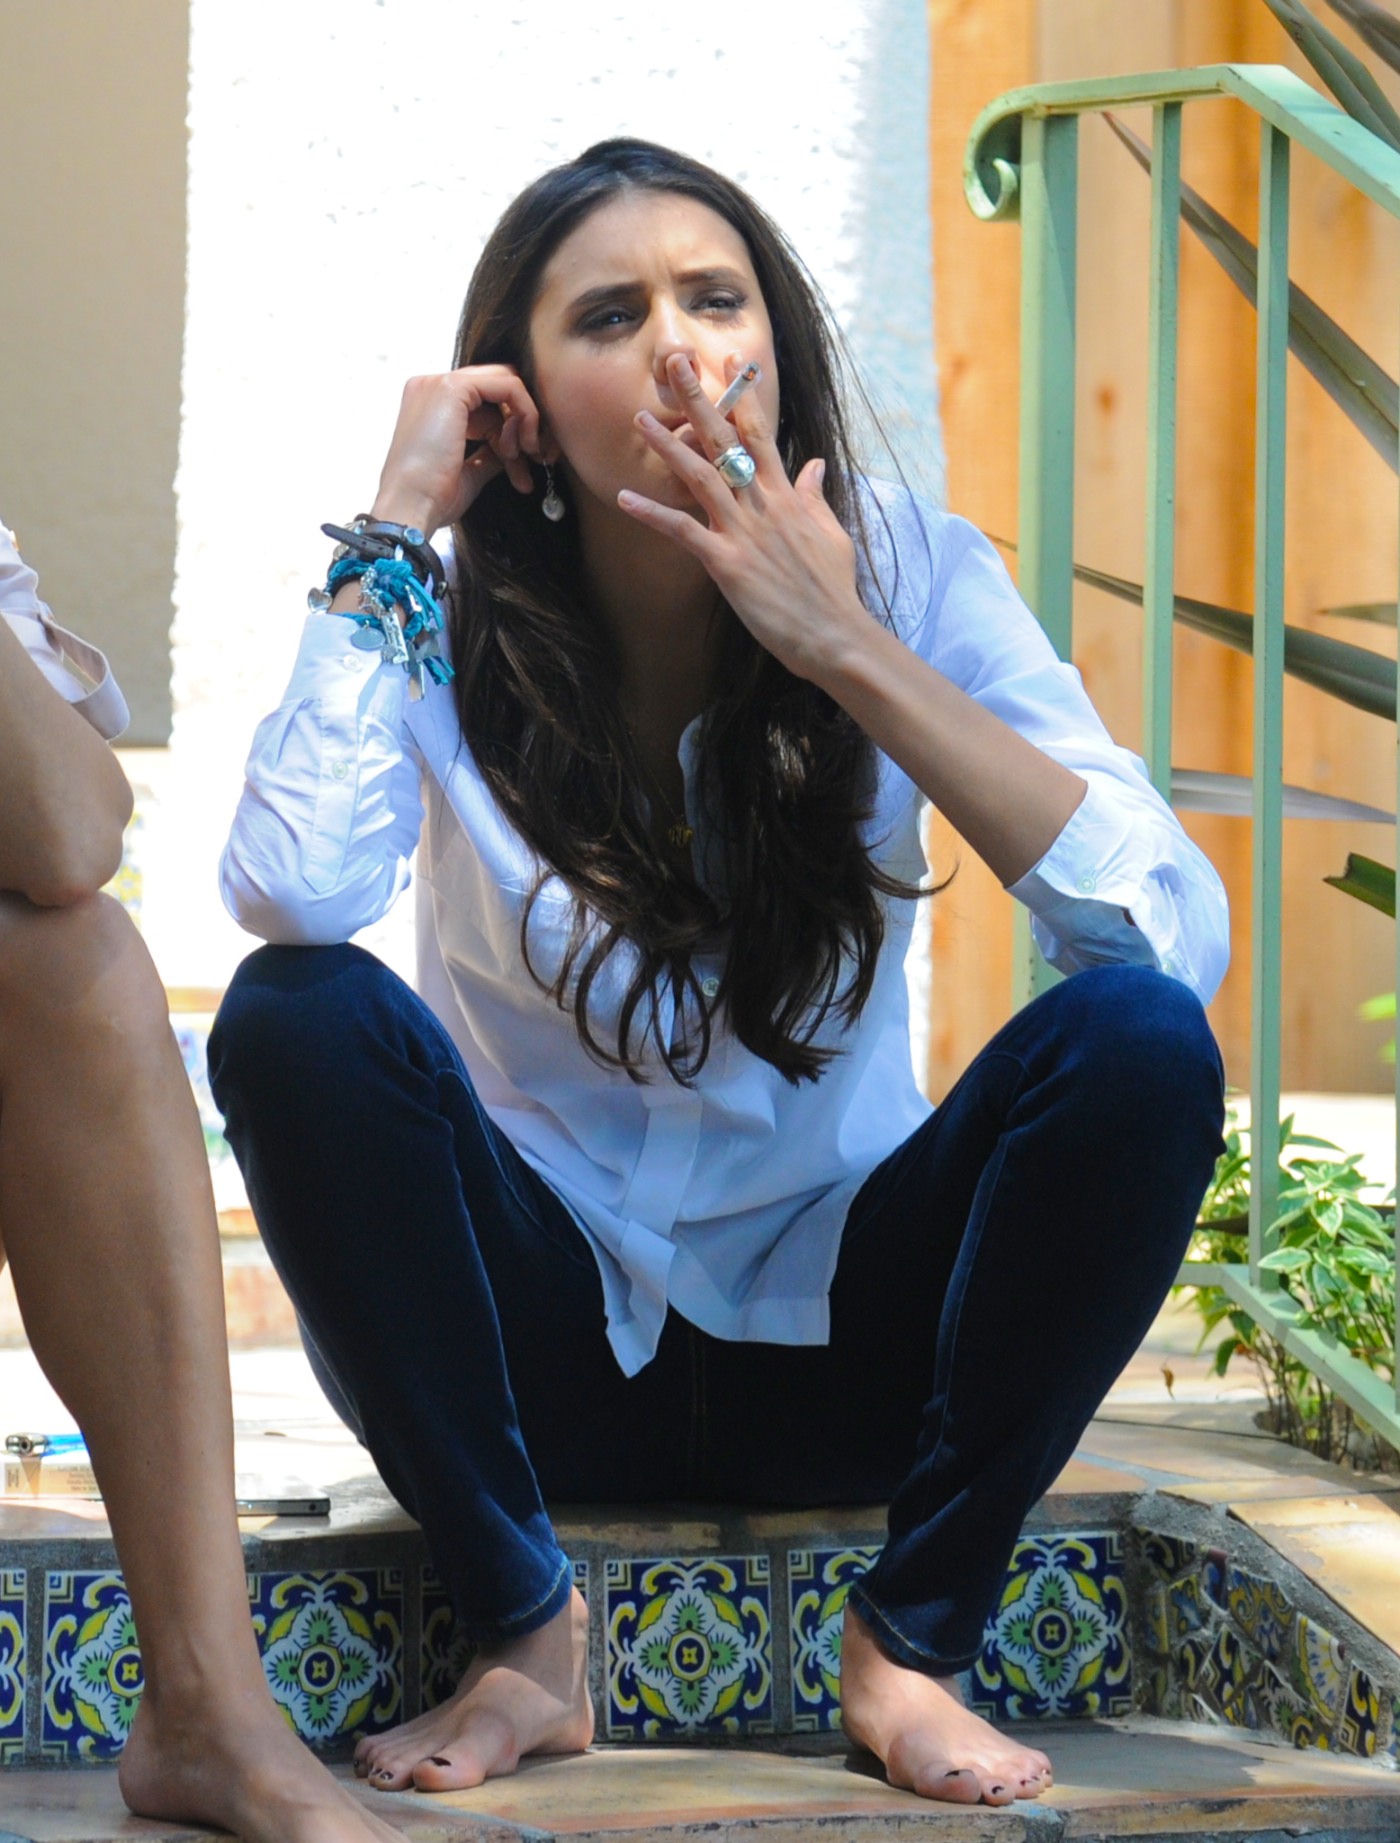 Nina - On the set of a photoshoot in West Hollywood - July 07, 2011